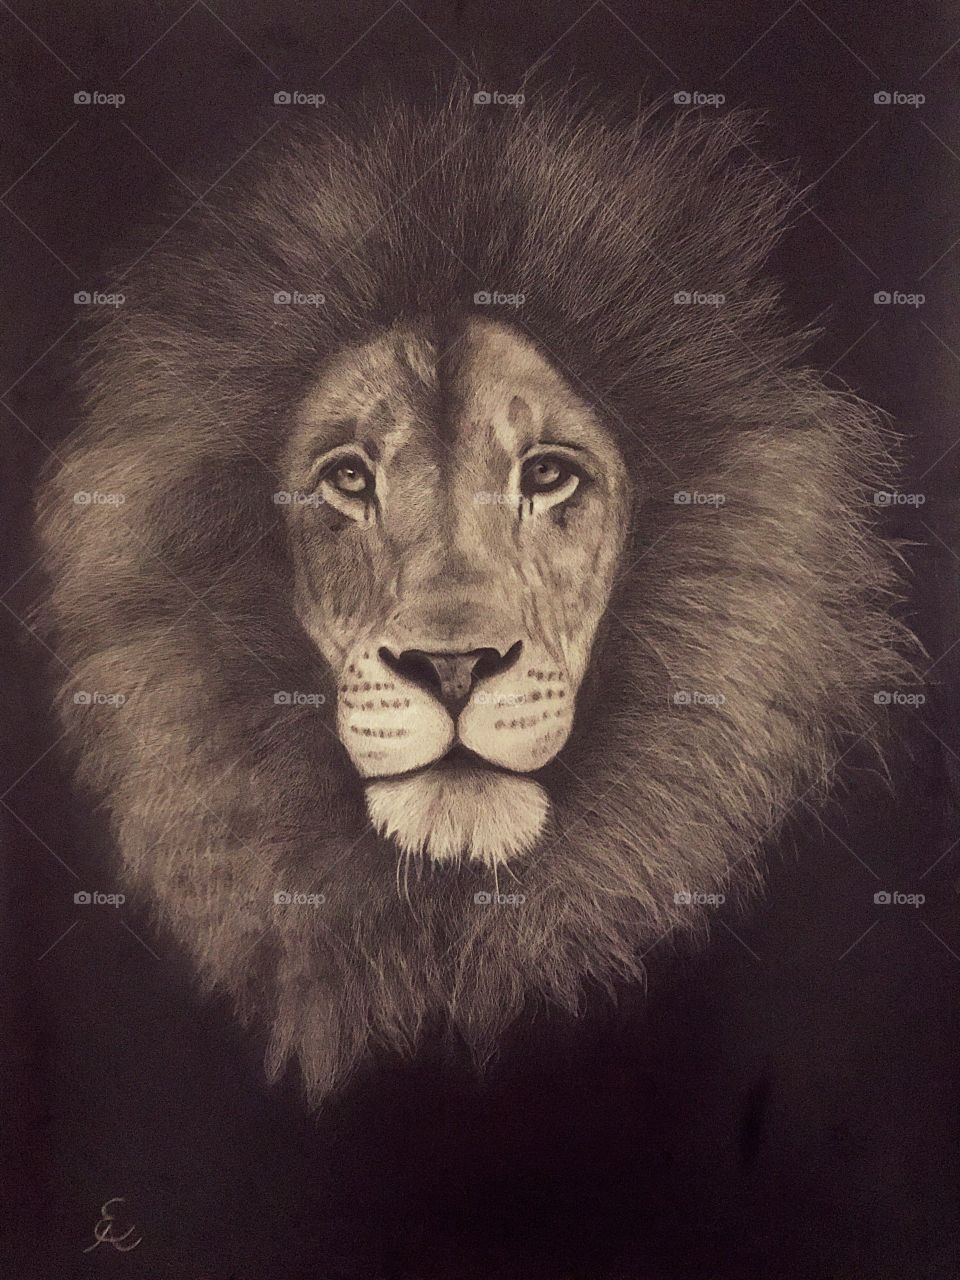 Lion (almost done)